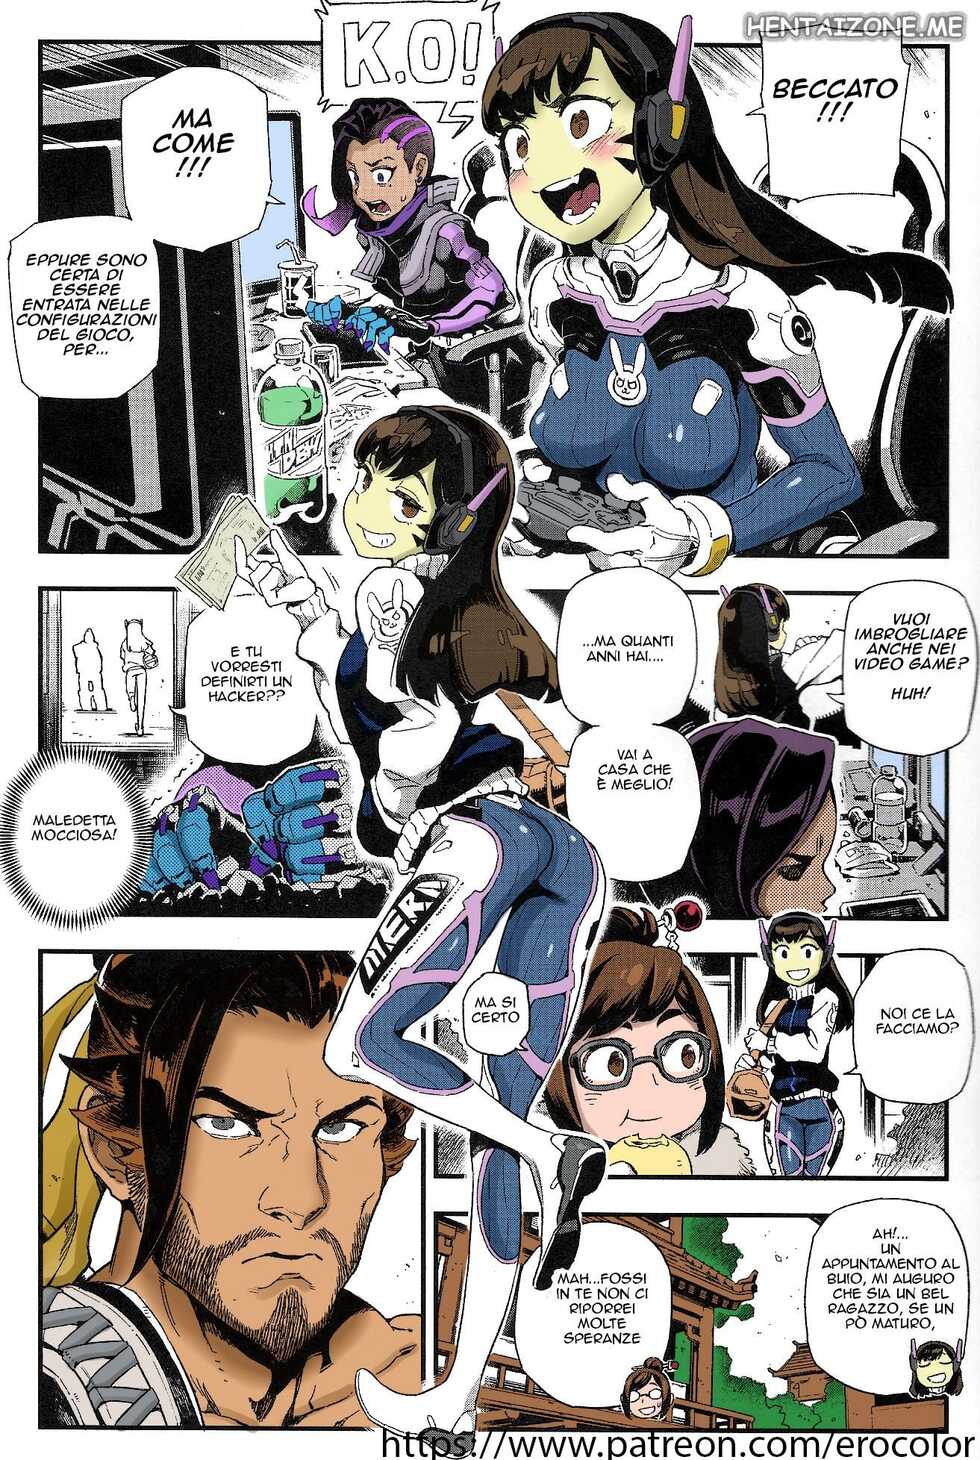 (FF30) [Bear Hand (Fishine, Ireading)] OVERTIME!! OVERWATCH FANBOOK VOL. 2 (Overwatch) [Italian] [Colorized] - Page 4